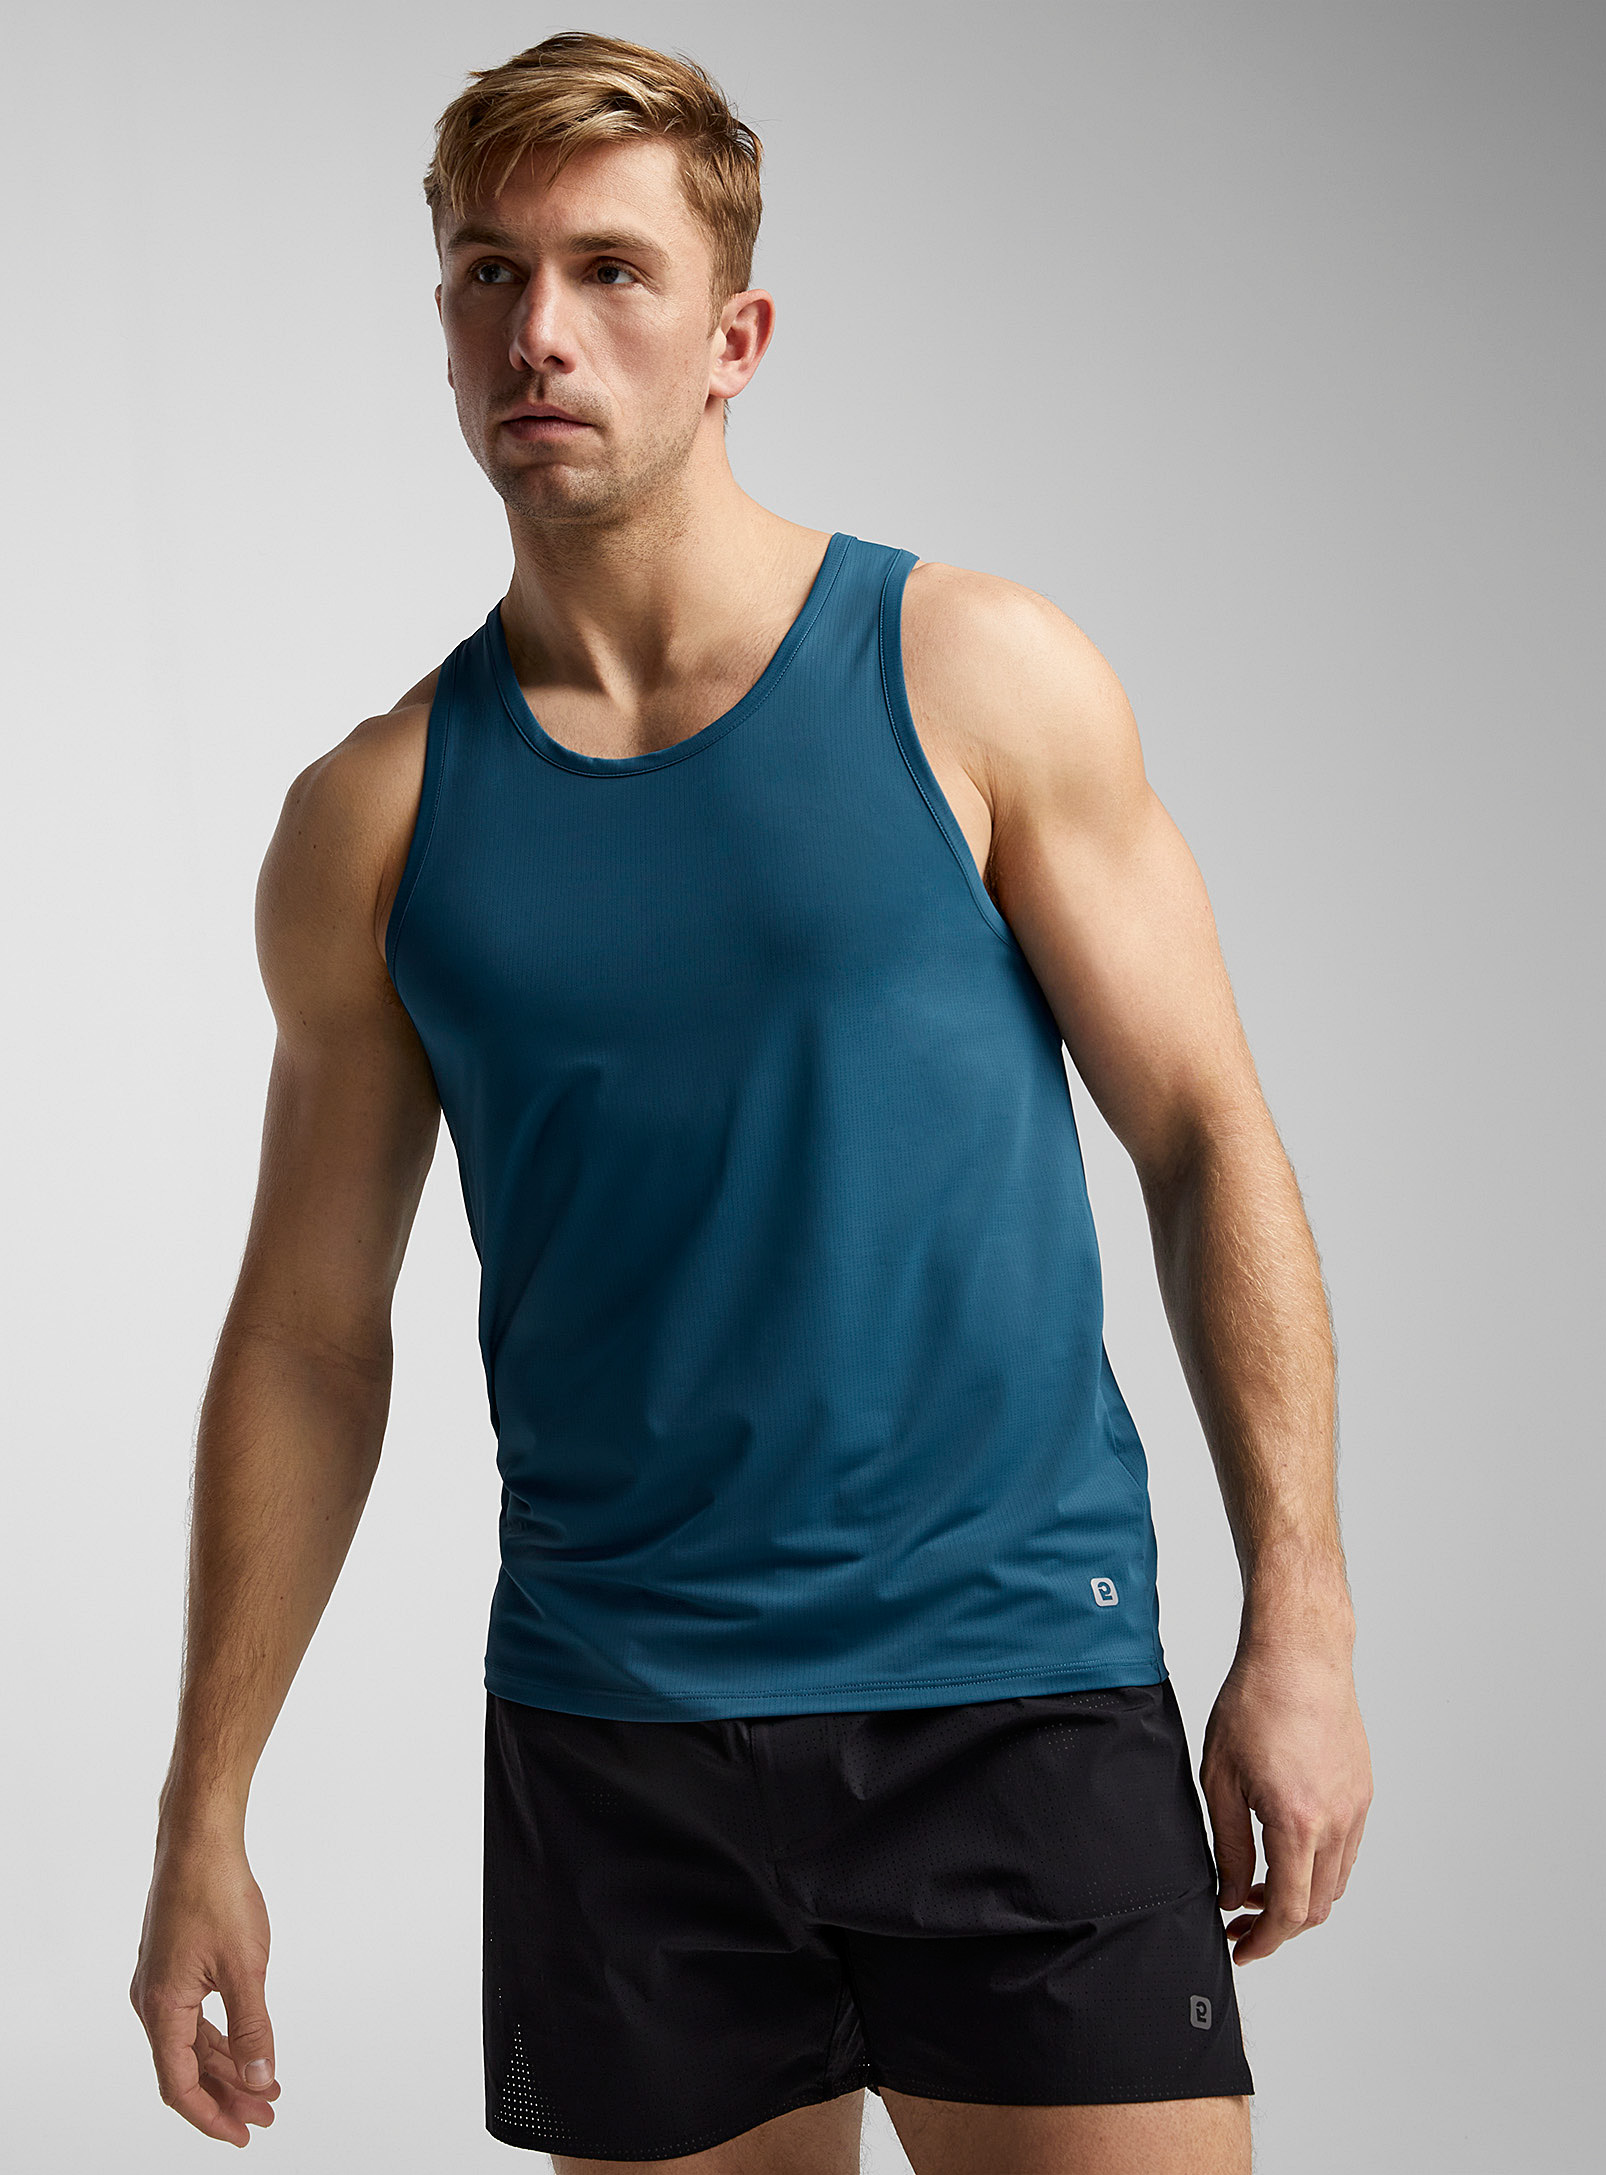 I.fiv5 Solid-colour Drop Armhole Micro-perforated Tank In Teal